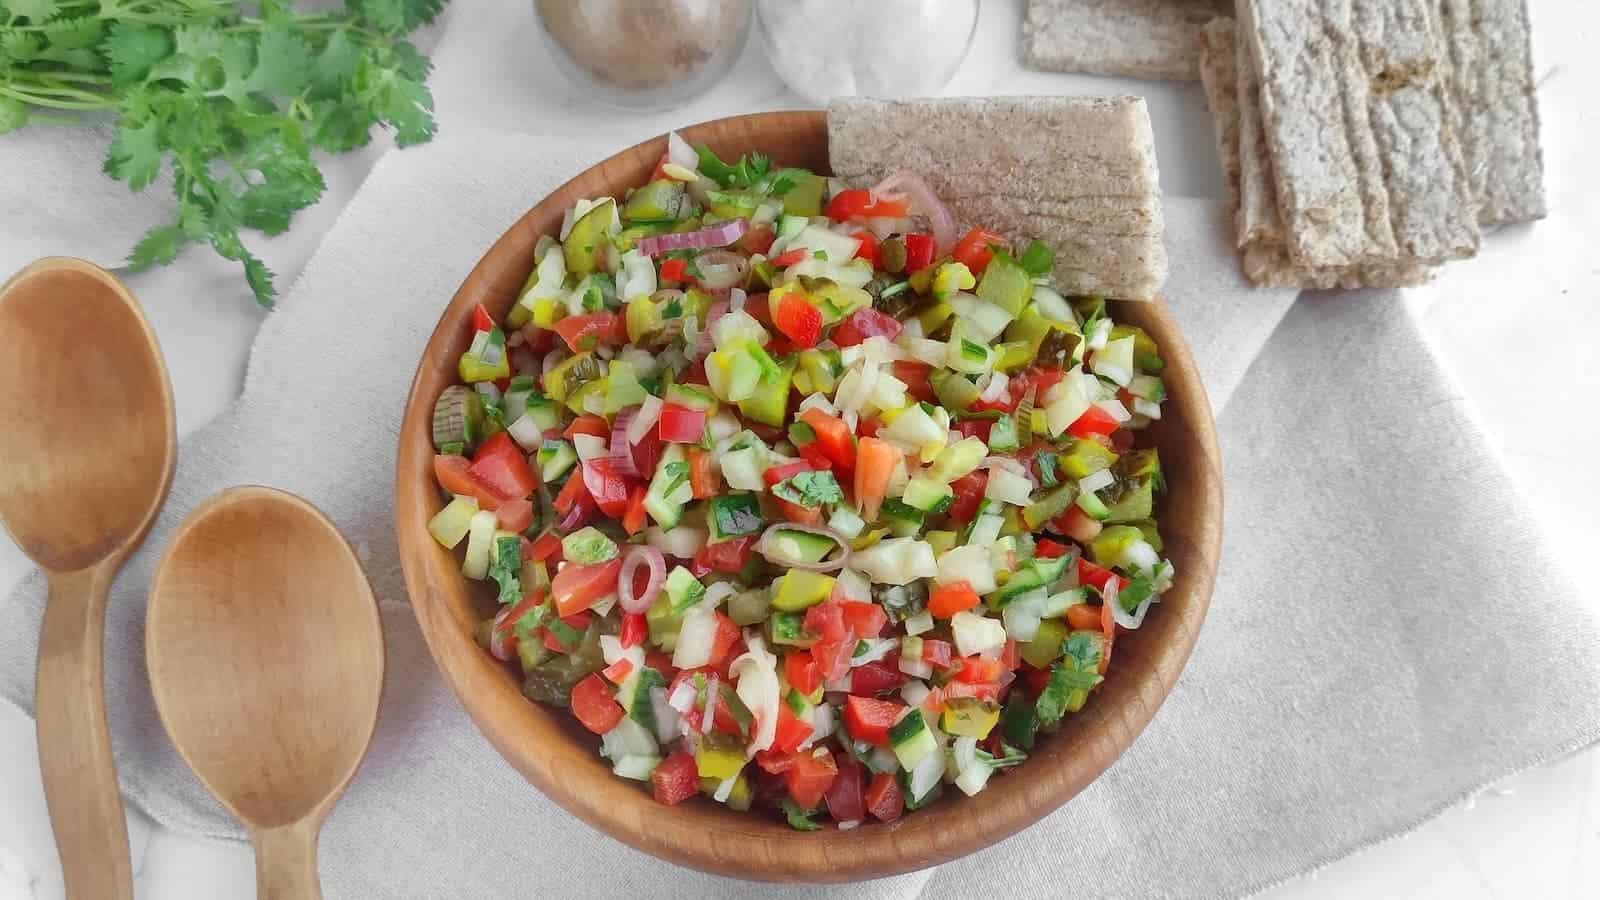 A wooden bowl filled with pickle de gallo salsa, surrounded by whole grain crackers and wooden utensils, on a white cloth.